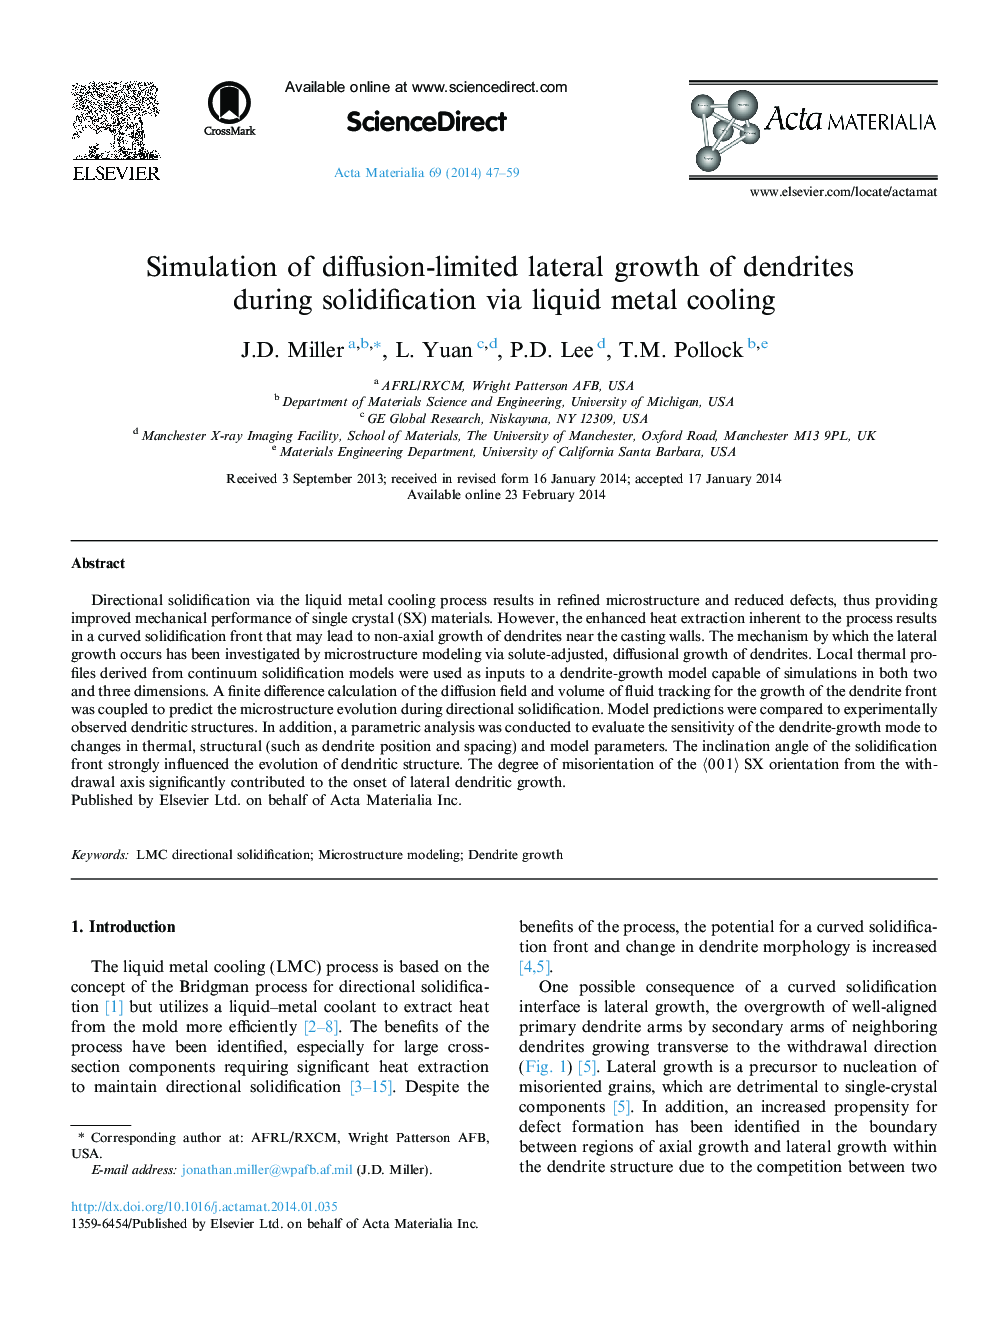 Simulation of diffusion-limited lateral growth of dendrites during solidification via liquid metal cooling